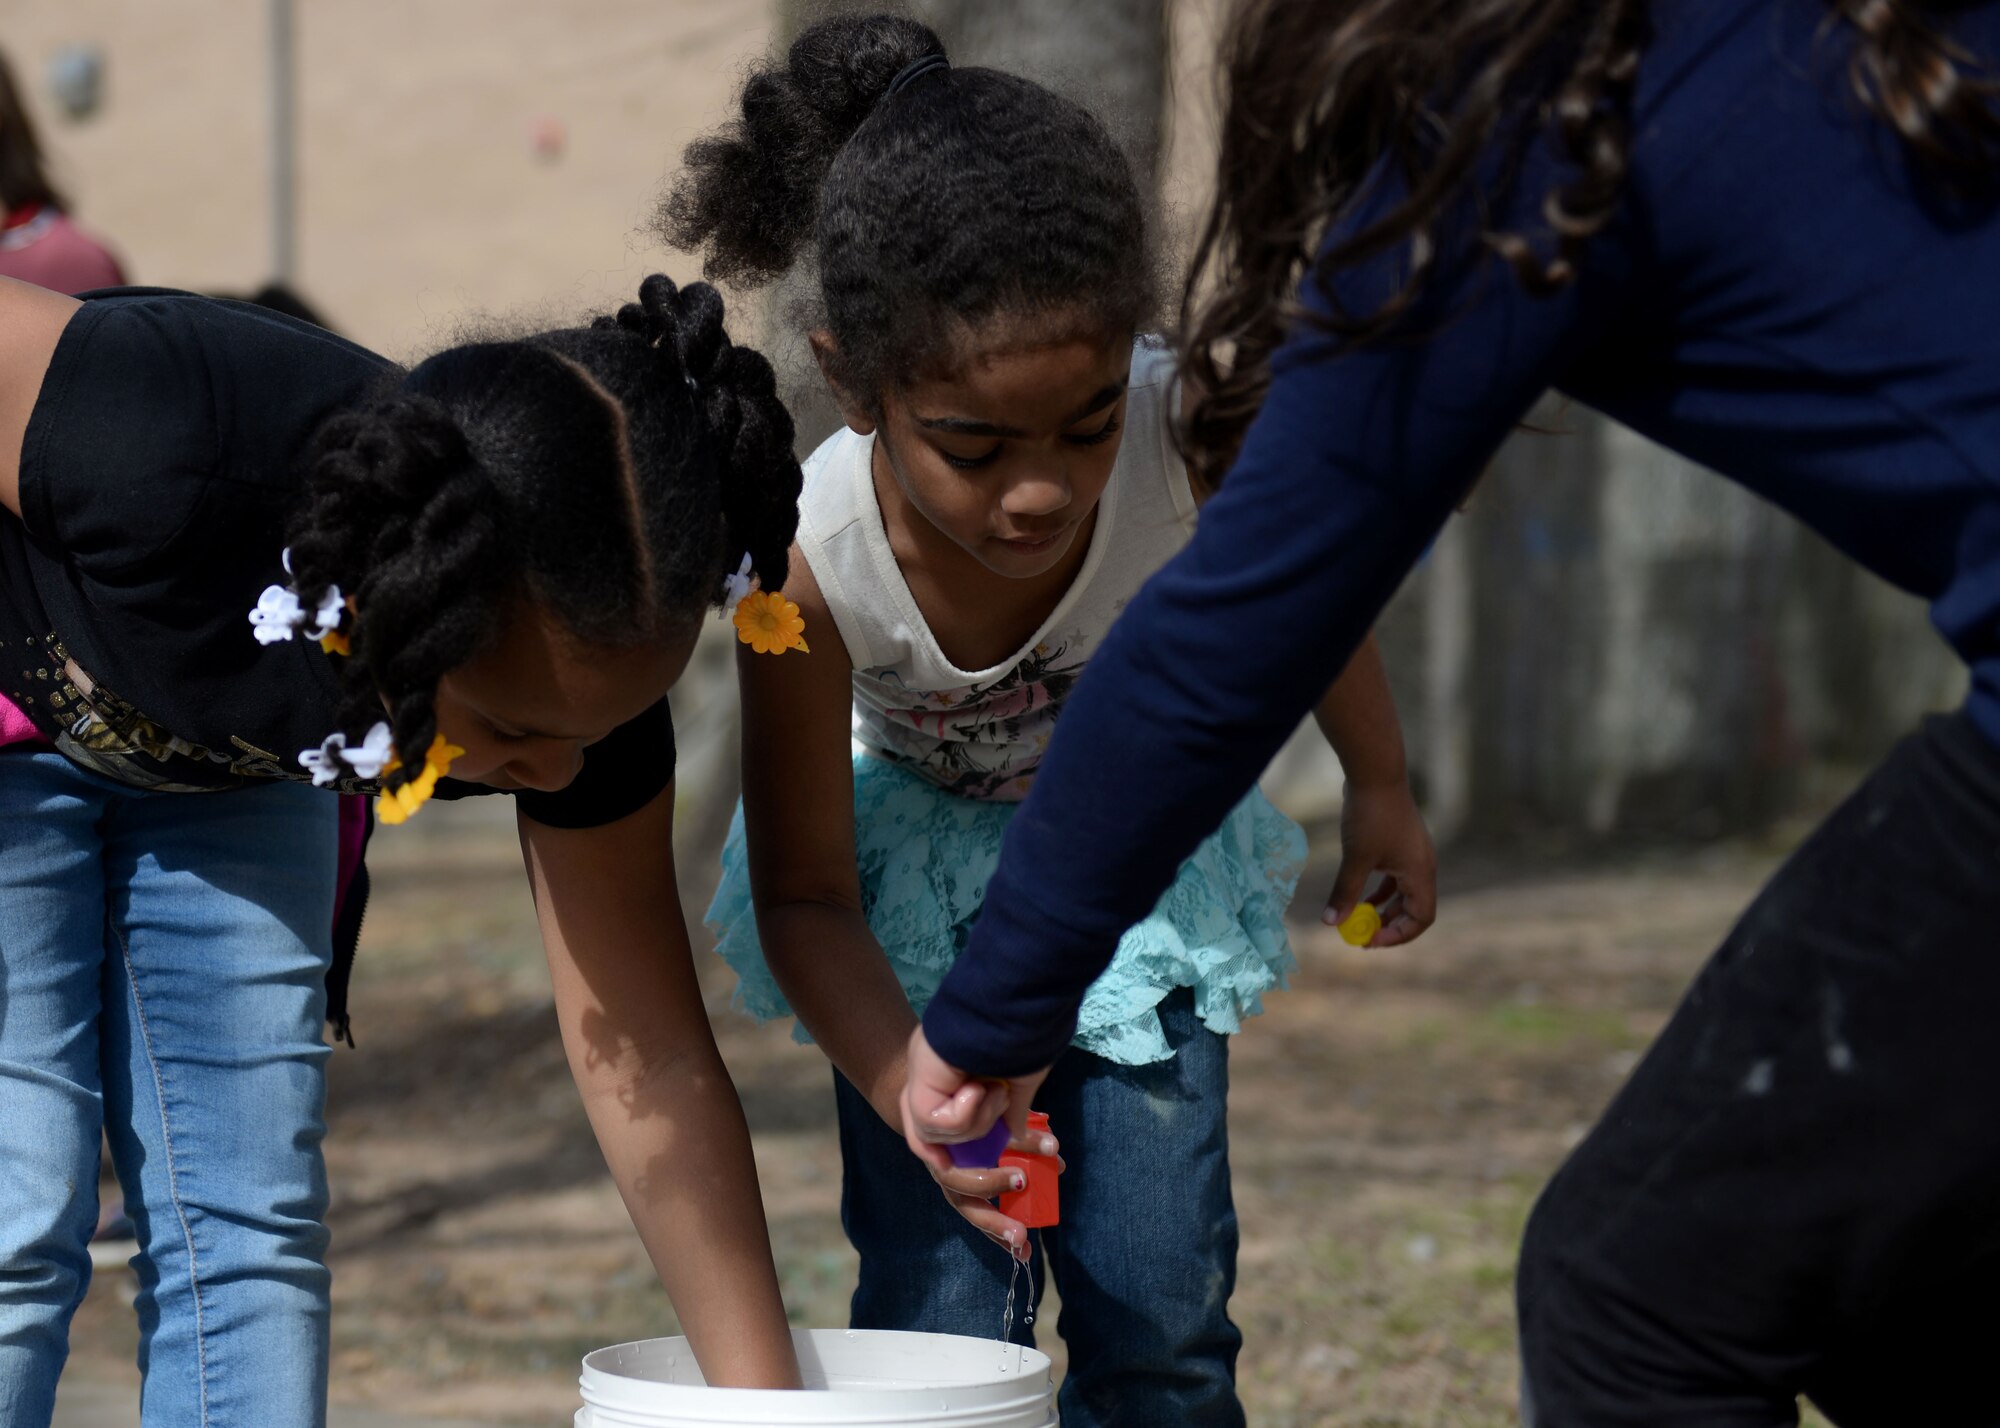 Three young girls with black hair reach into a white bucket to fill small colored bottles with water.